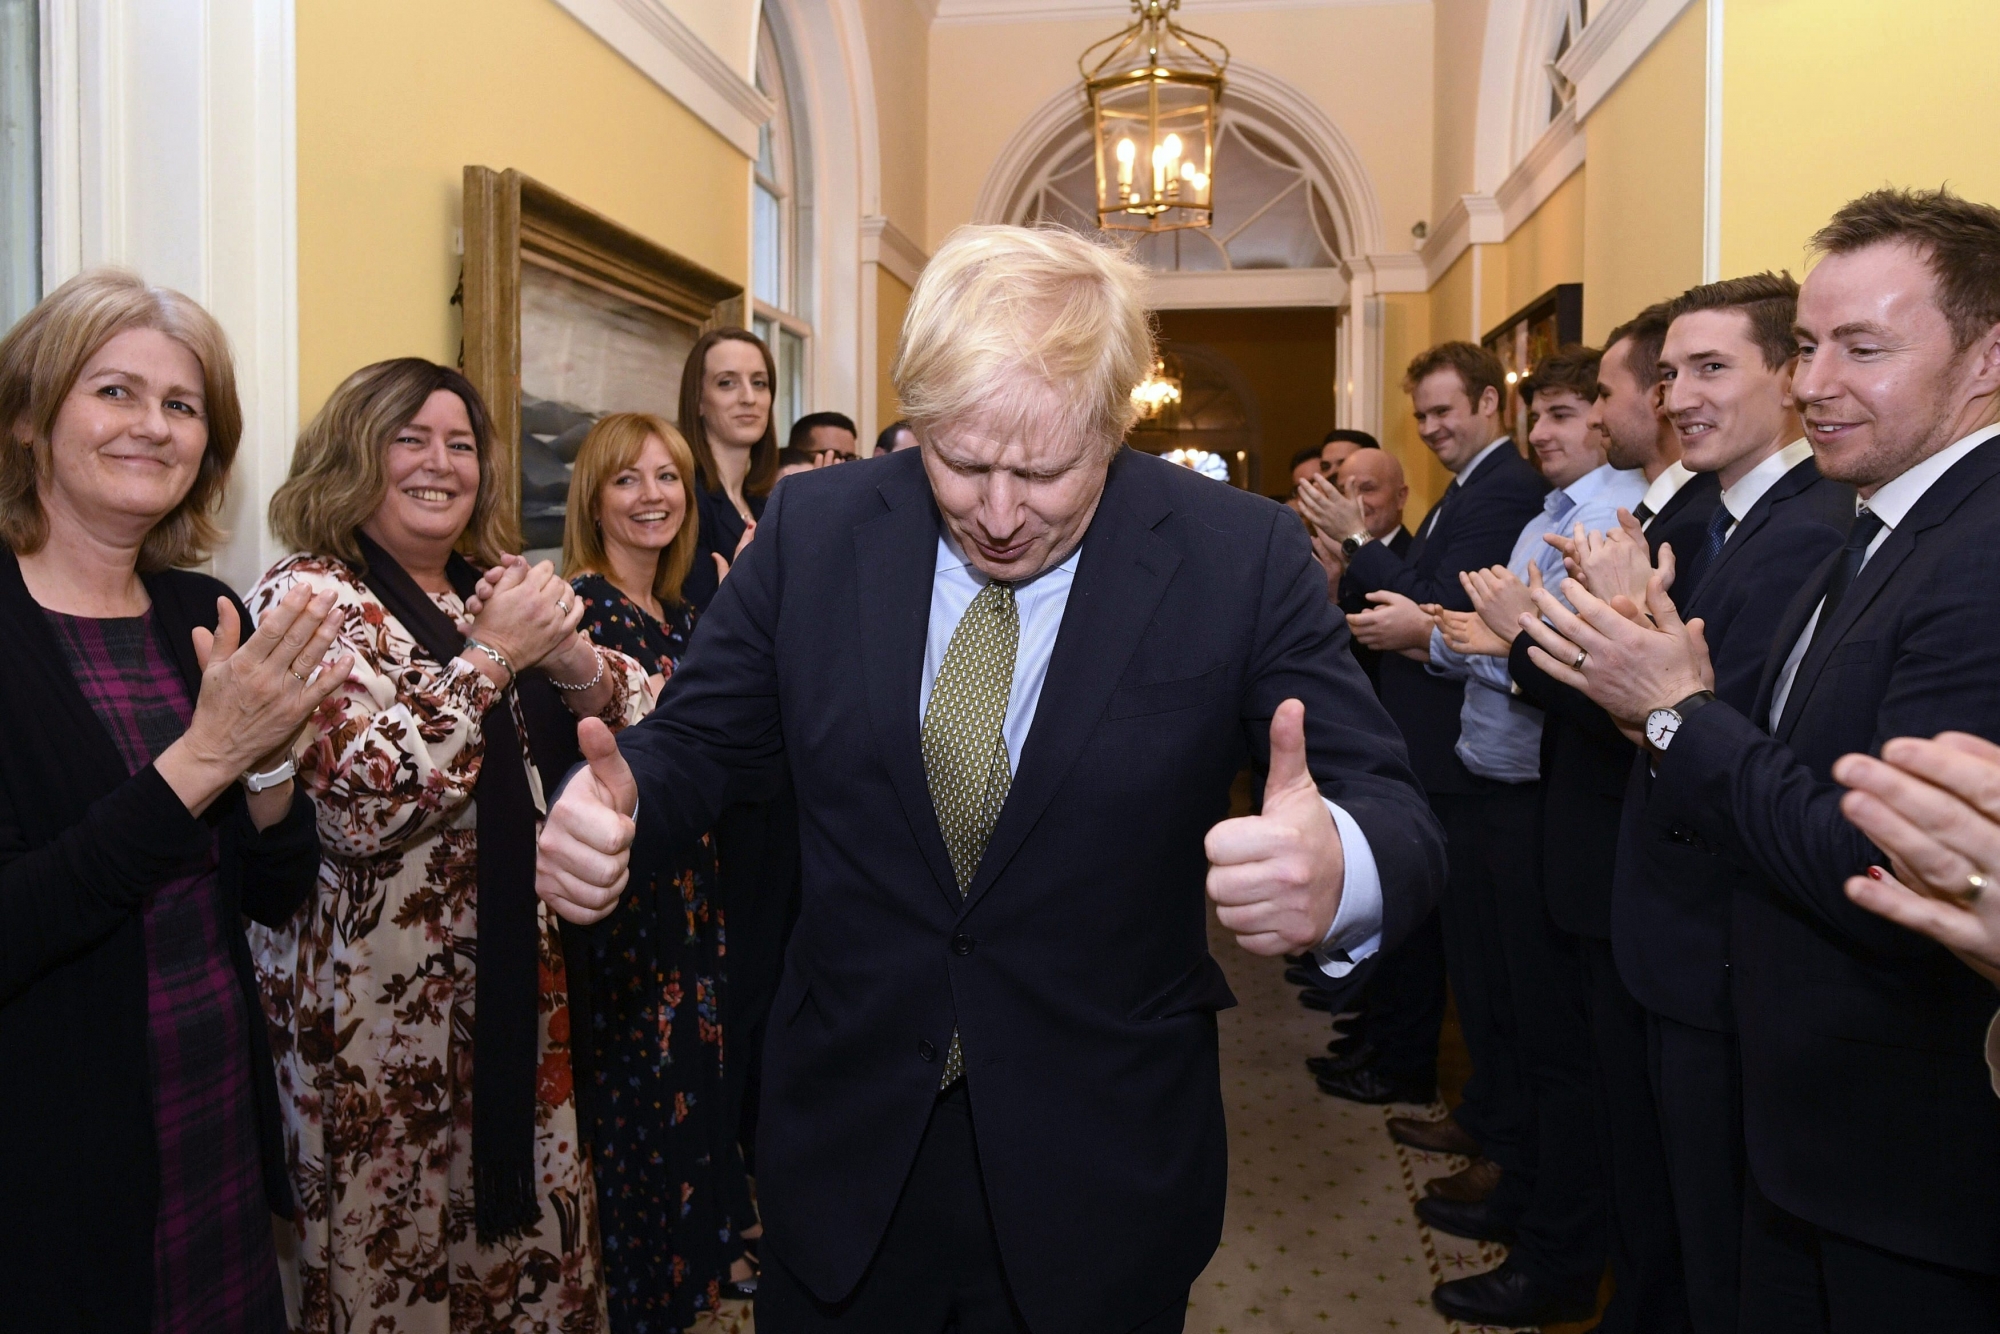 Britain's Prime Minister Boris Johnson is greeted by staff as he returns to 10 Downing Street, London, after meeting Queen Elizabeth II at Buckingham Palace and accepting her invitation to form a new government, Friday Dec. 13, 2019.  Boris Johnson led his Conservative Party to a landslide victory in BritainÄôs election that was dominated by Brexit. (Stefan Rousseau/PA via AP) Britain Brexit Election